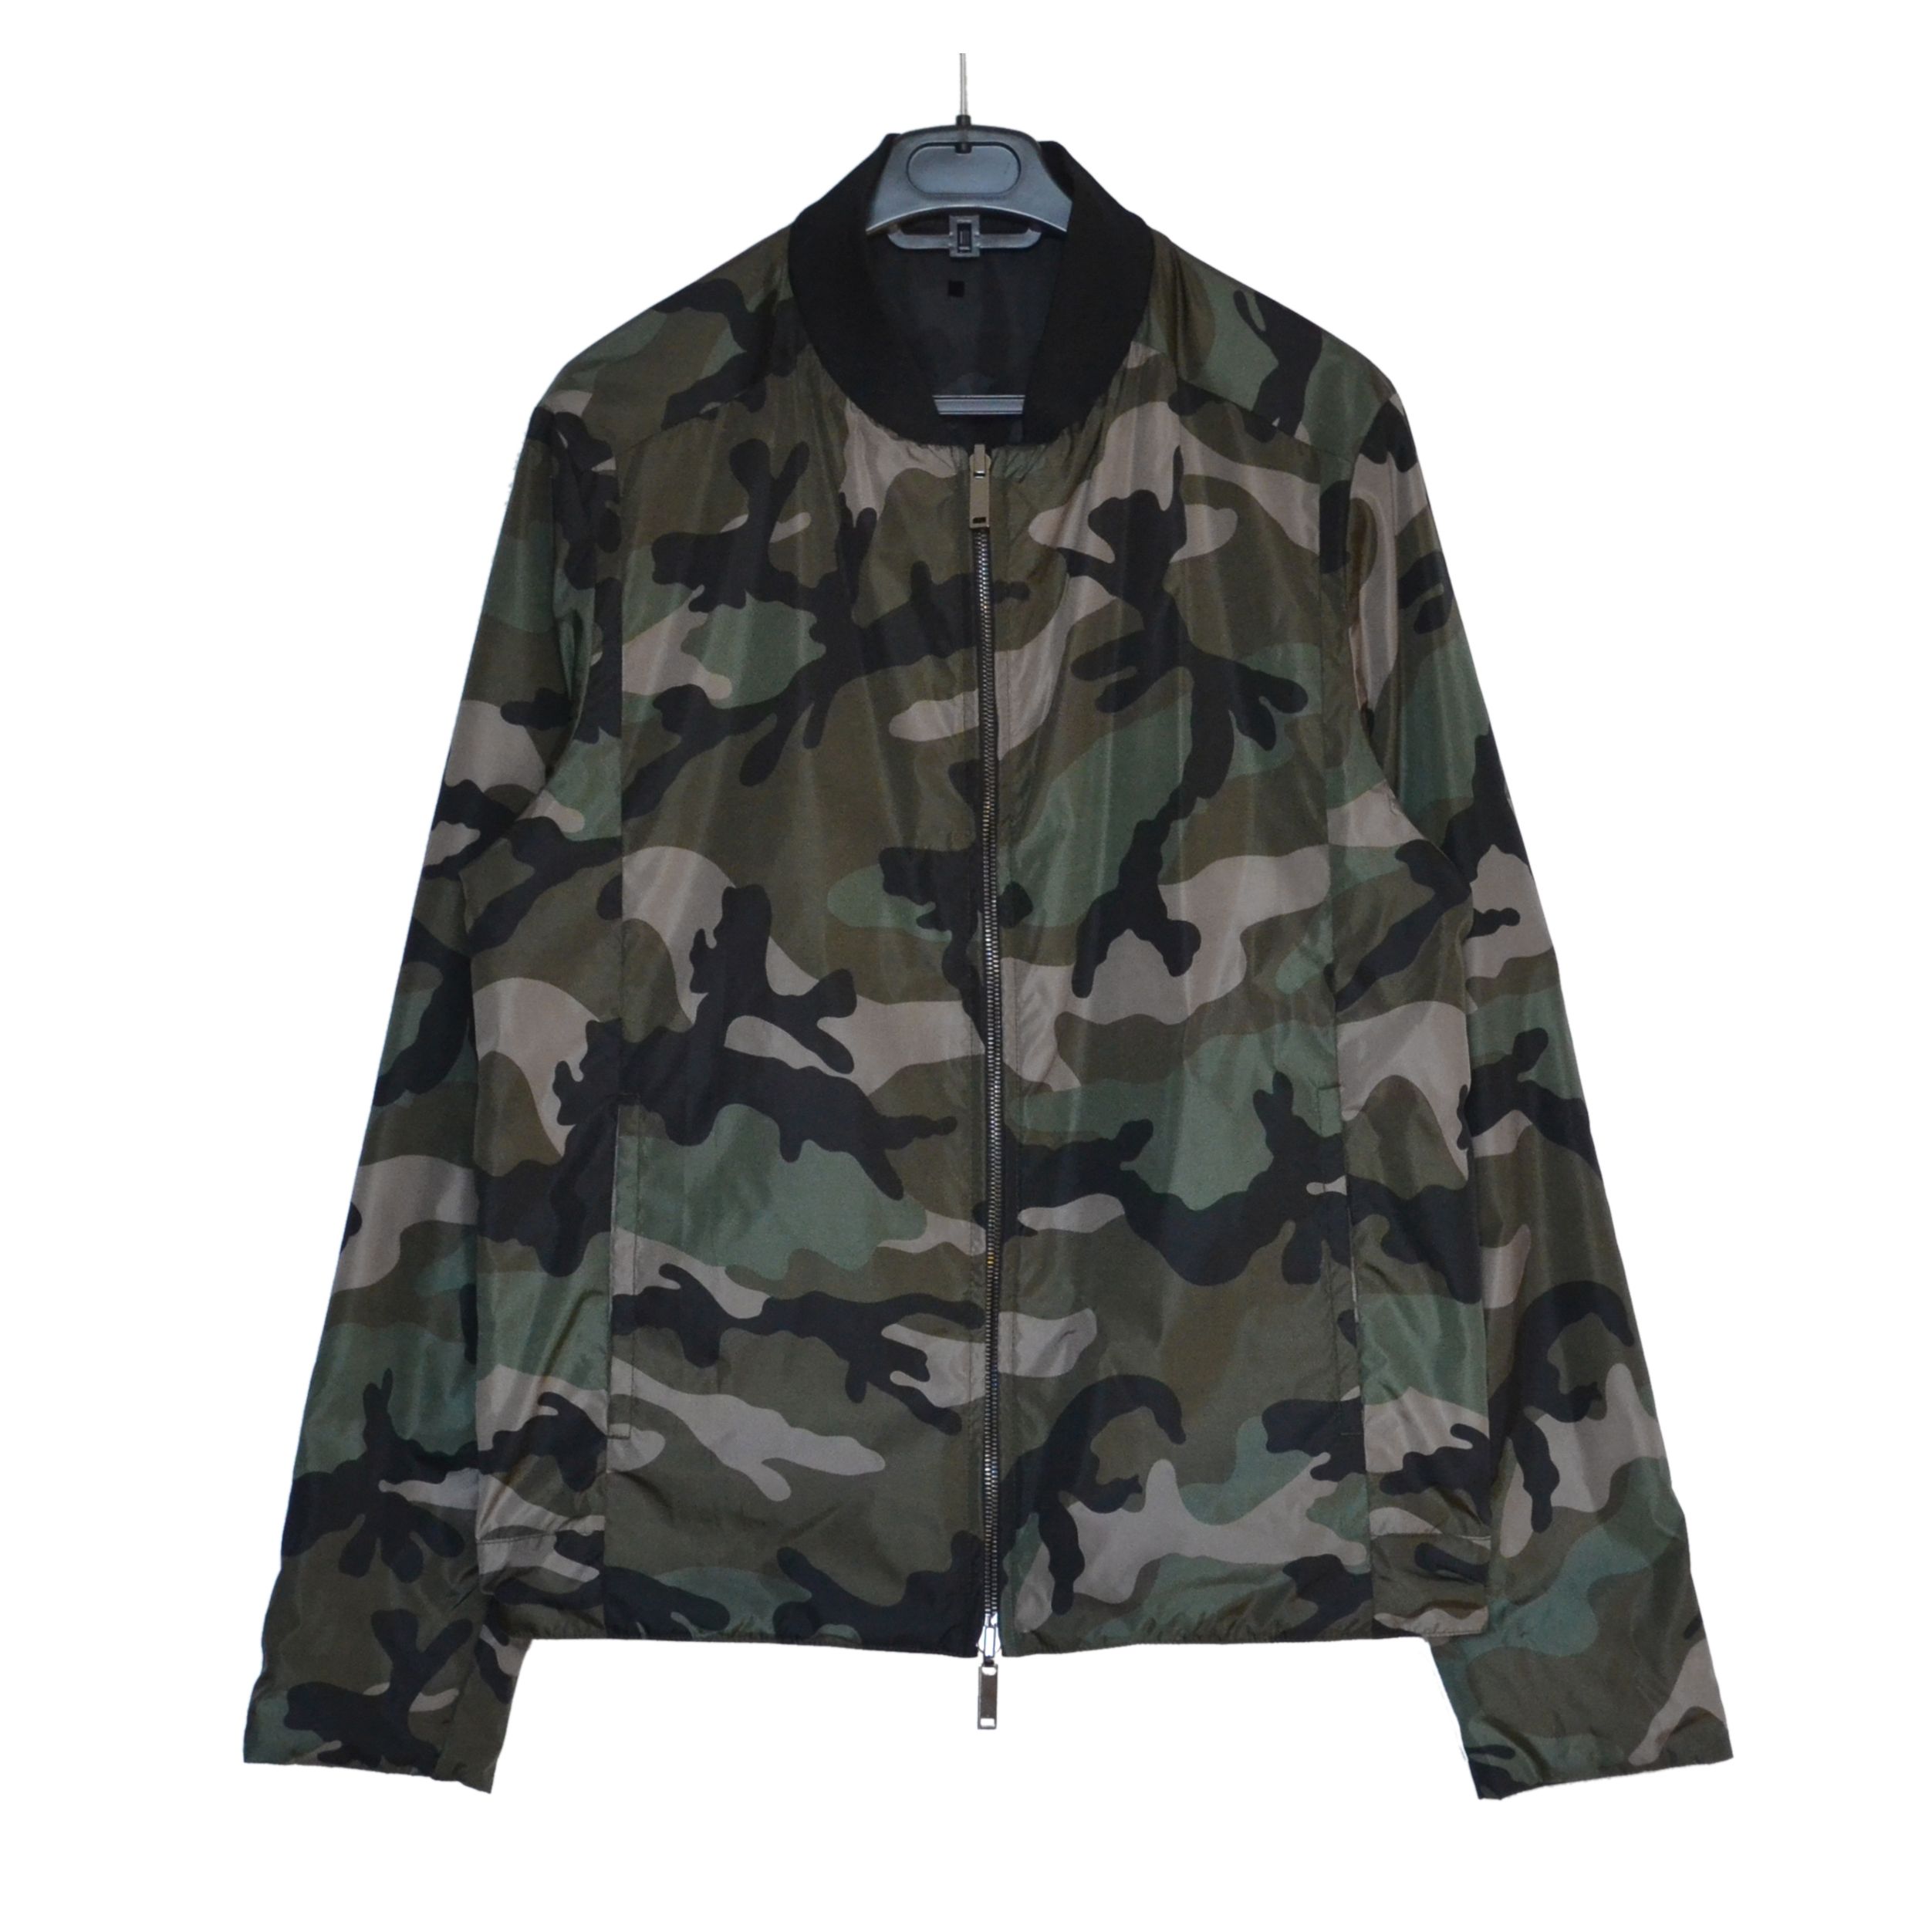 Valentino Valentino Jacket Reversible Bomber Camouflage Size US S / EU 44-46 / 1 - 1 Preview